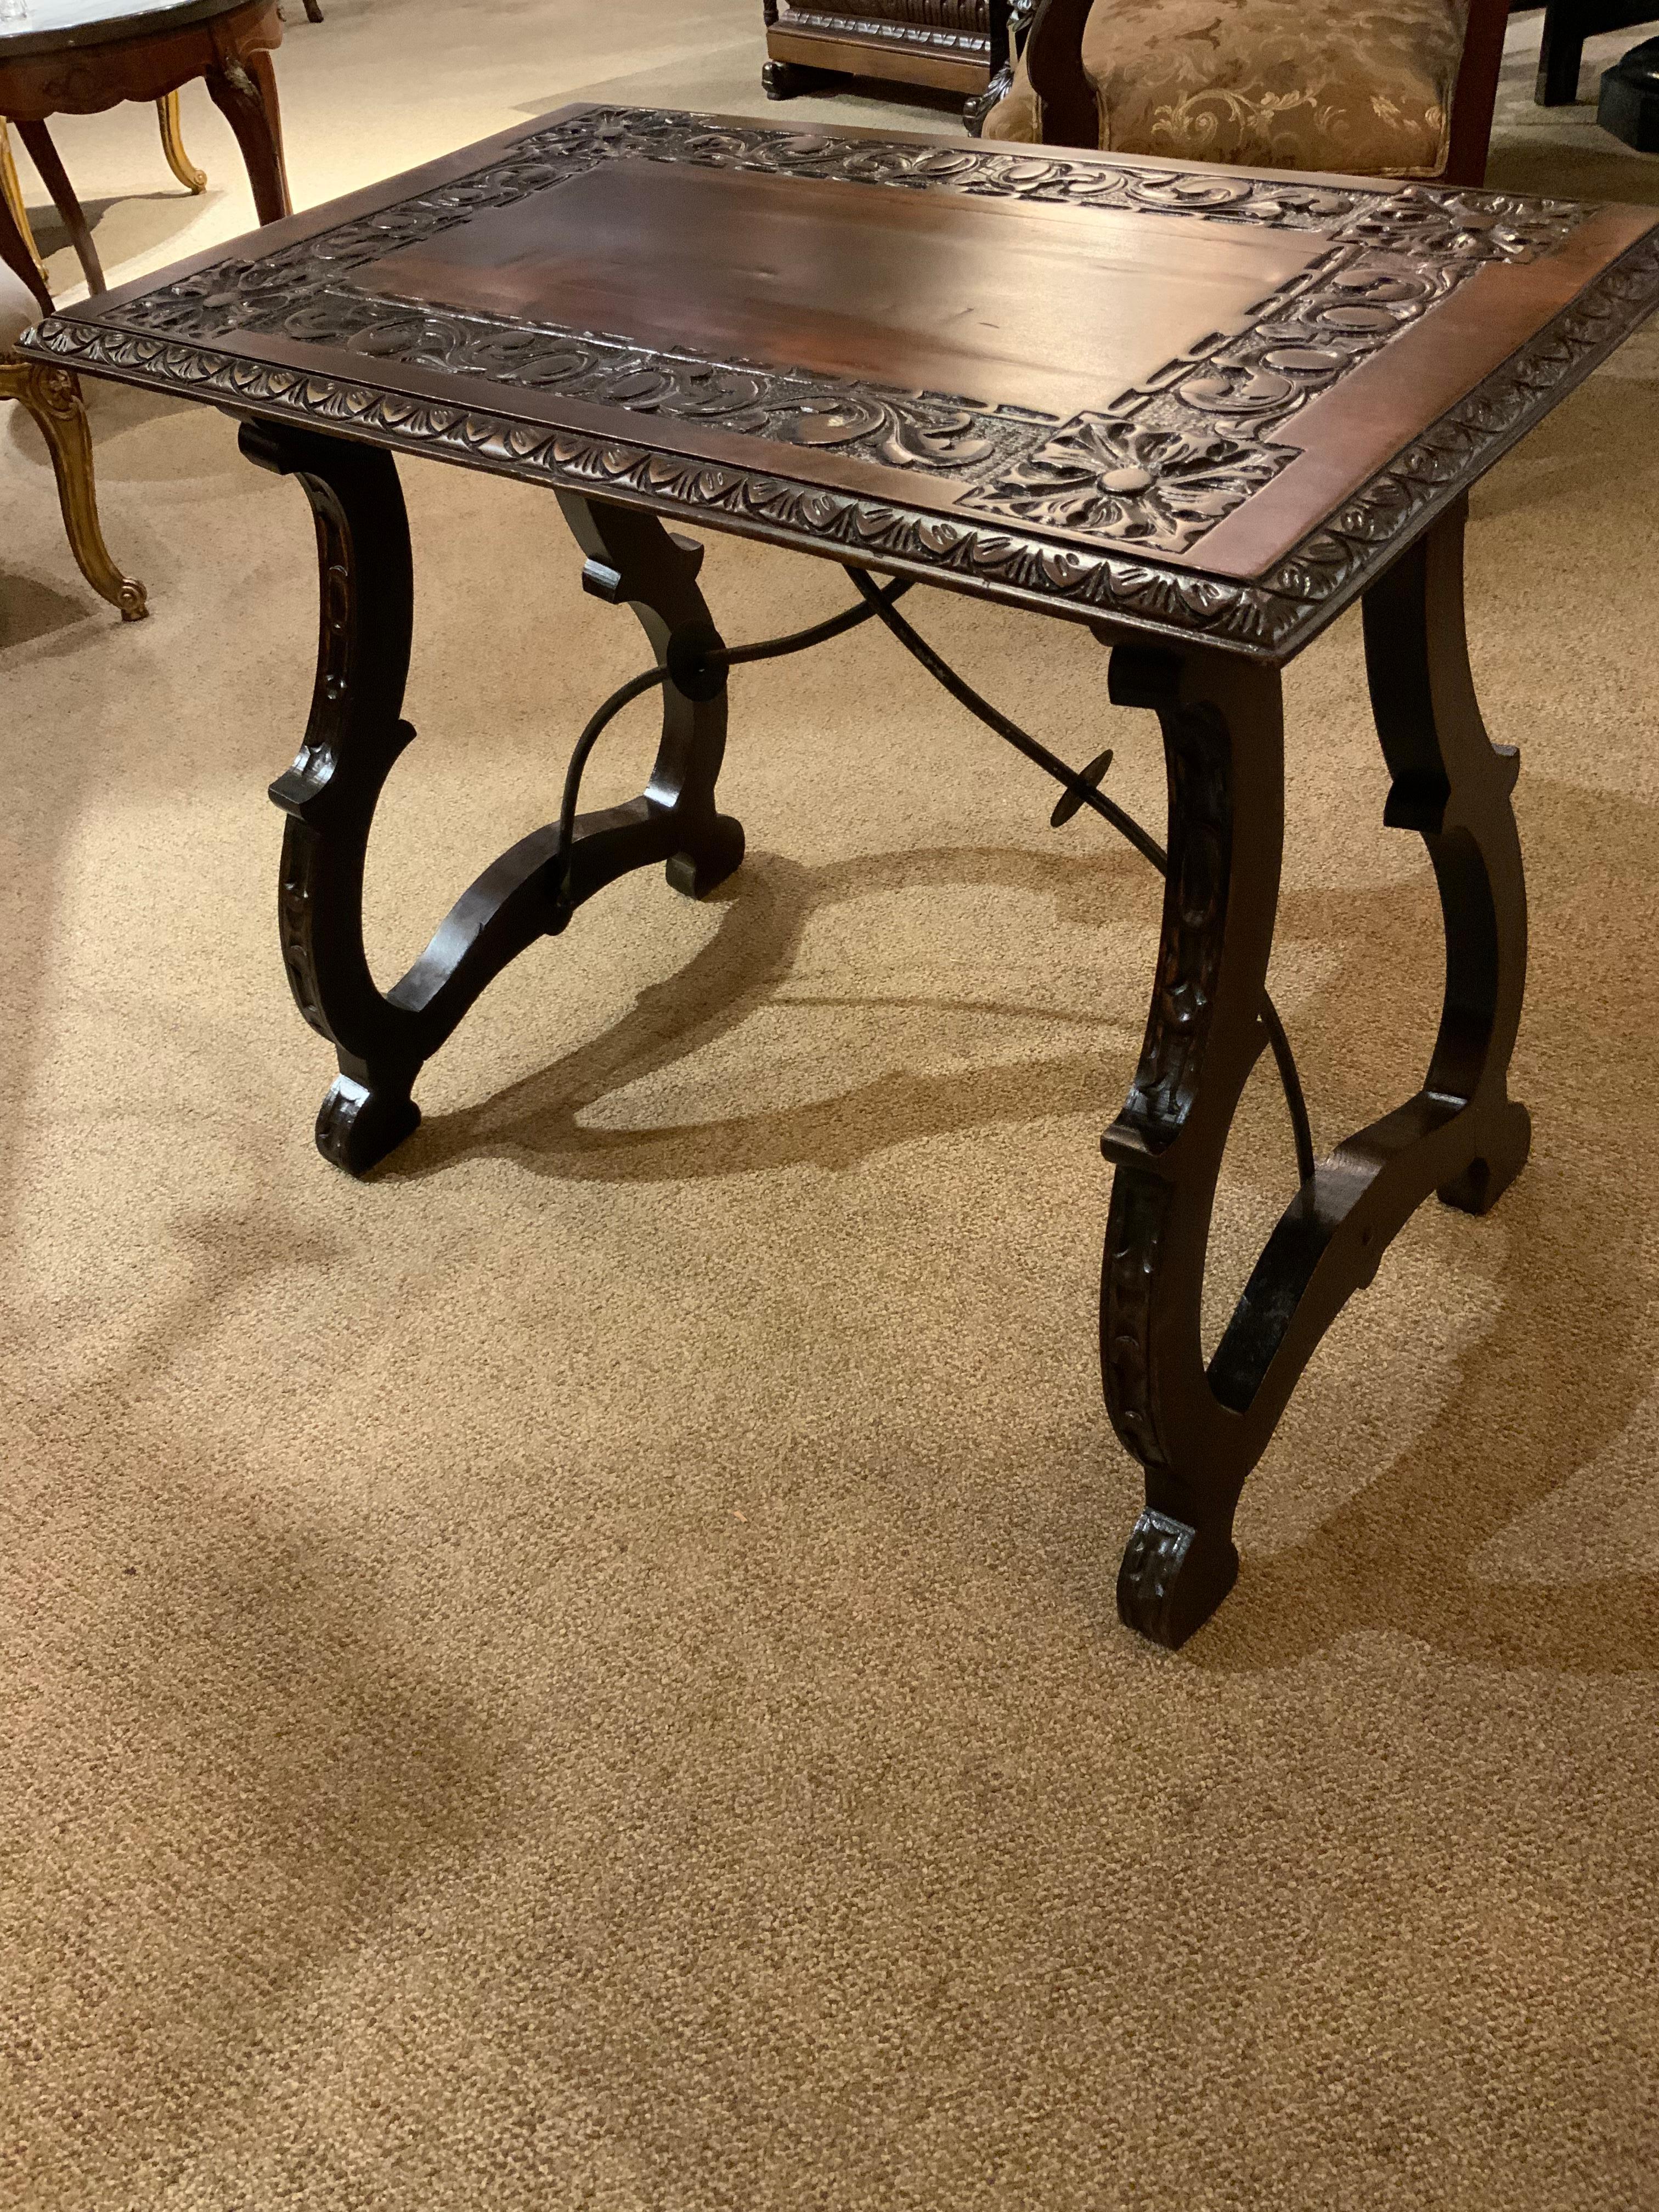 Hand-Carved Spanish Baroque Style Carved Table with Iron Stretcher 19th C